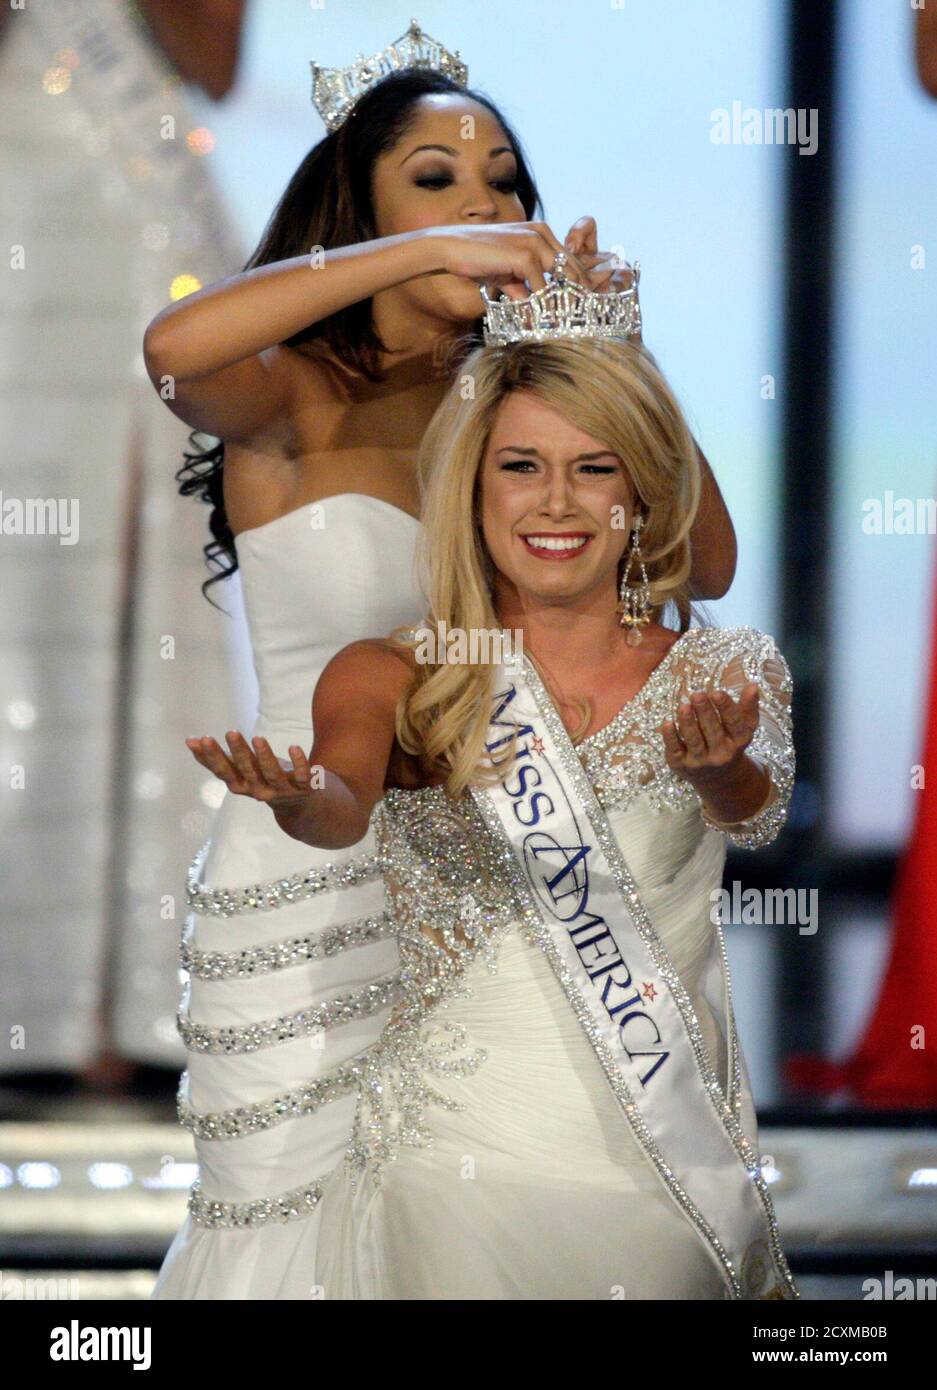 Miss Nebraska Teresa Scanlan, 17, reacts as she is crowned Miss America 2011 by Caressa Cameron, Miss America 2010, during the Miss America Pageant at the Theatre for the Performing Arts at the Planet Hollywood Resort and Casino in Las Vegas, Nevada, January 15, 2011. REUTERS/Steve Marcus (UNITED STATES - Tags: ENTERTAINMENT) Stock Photo